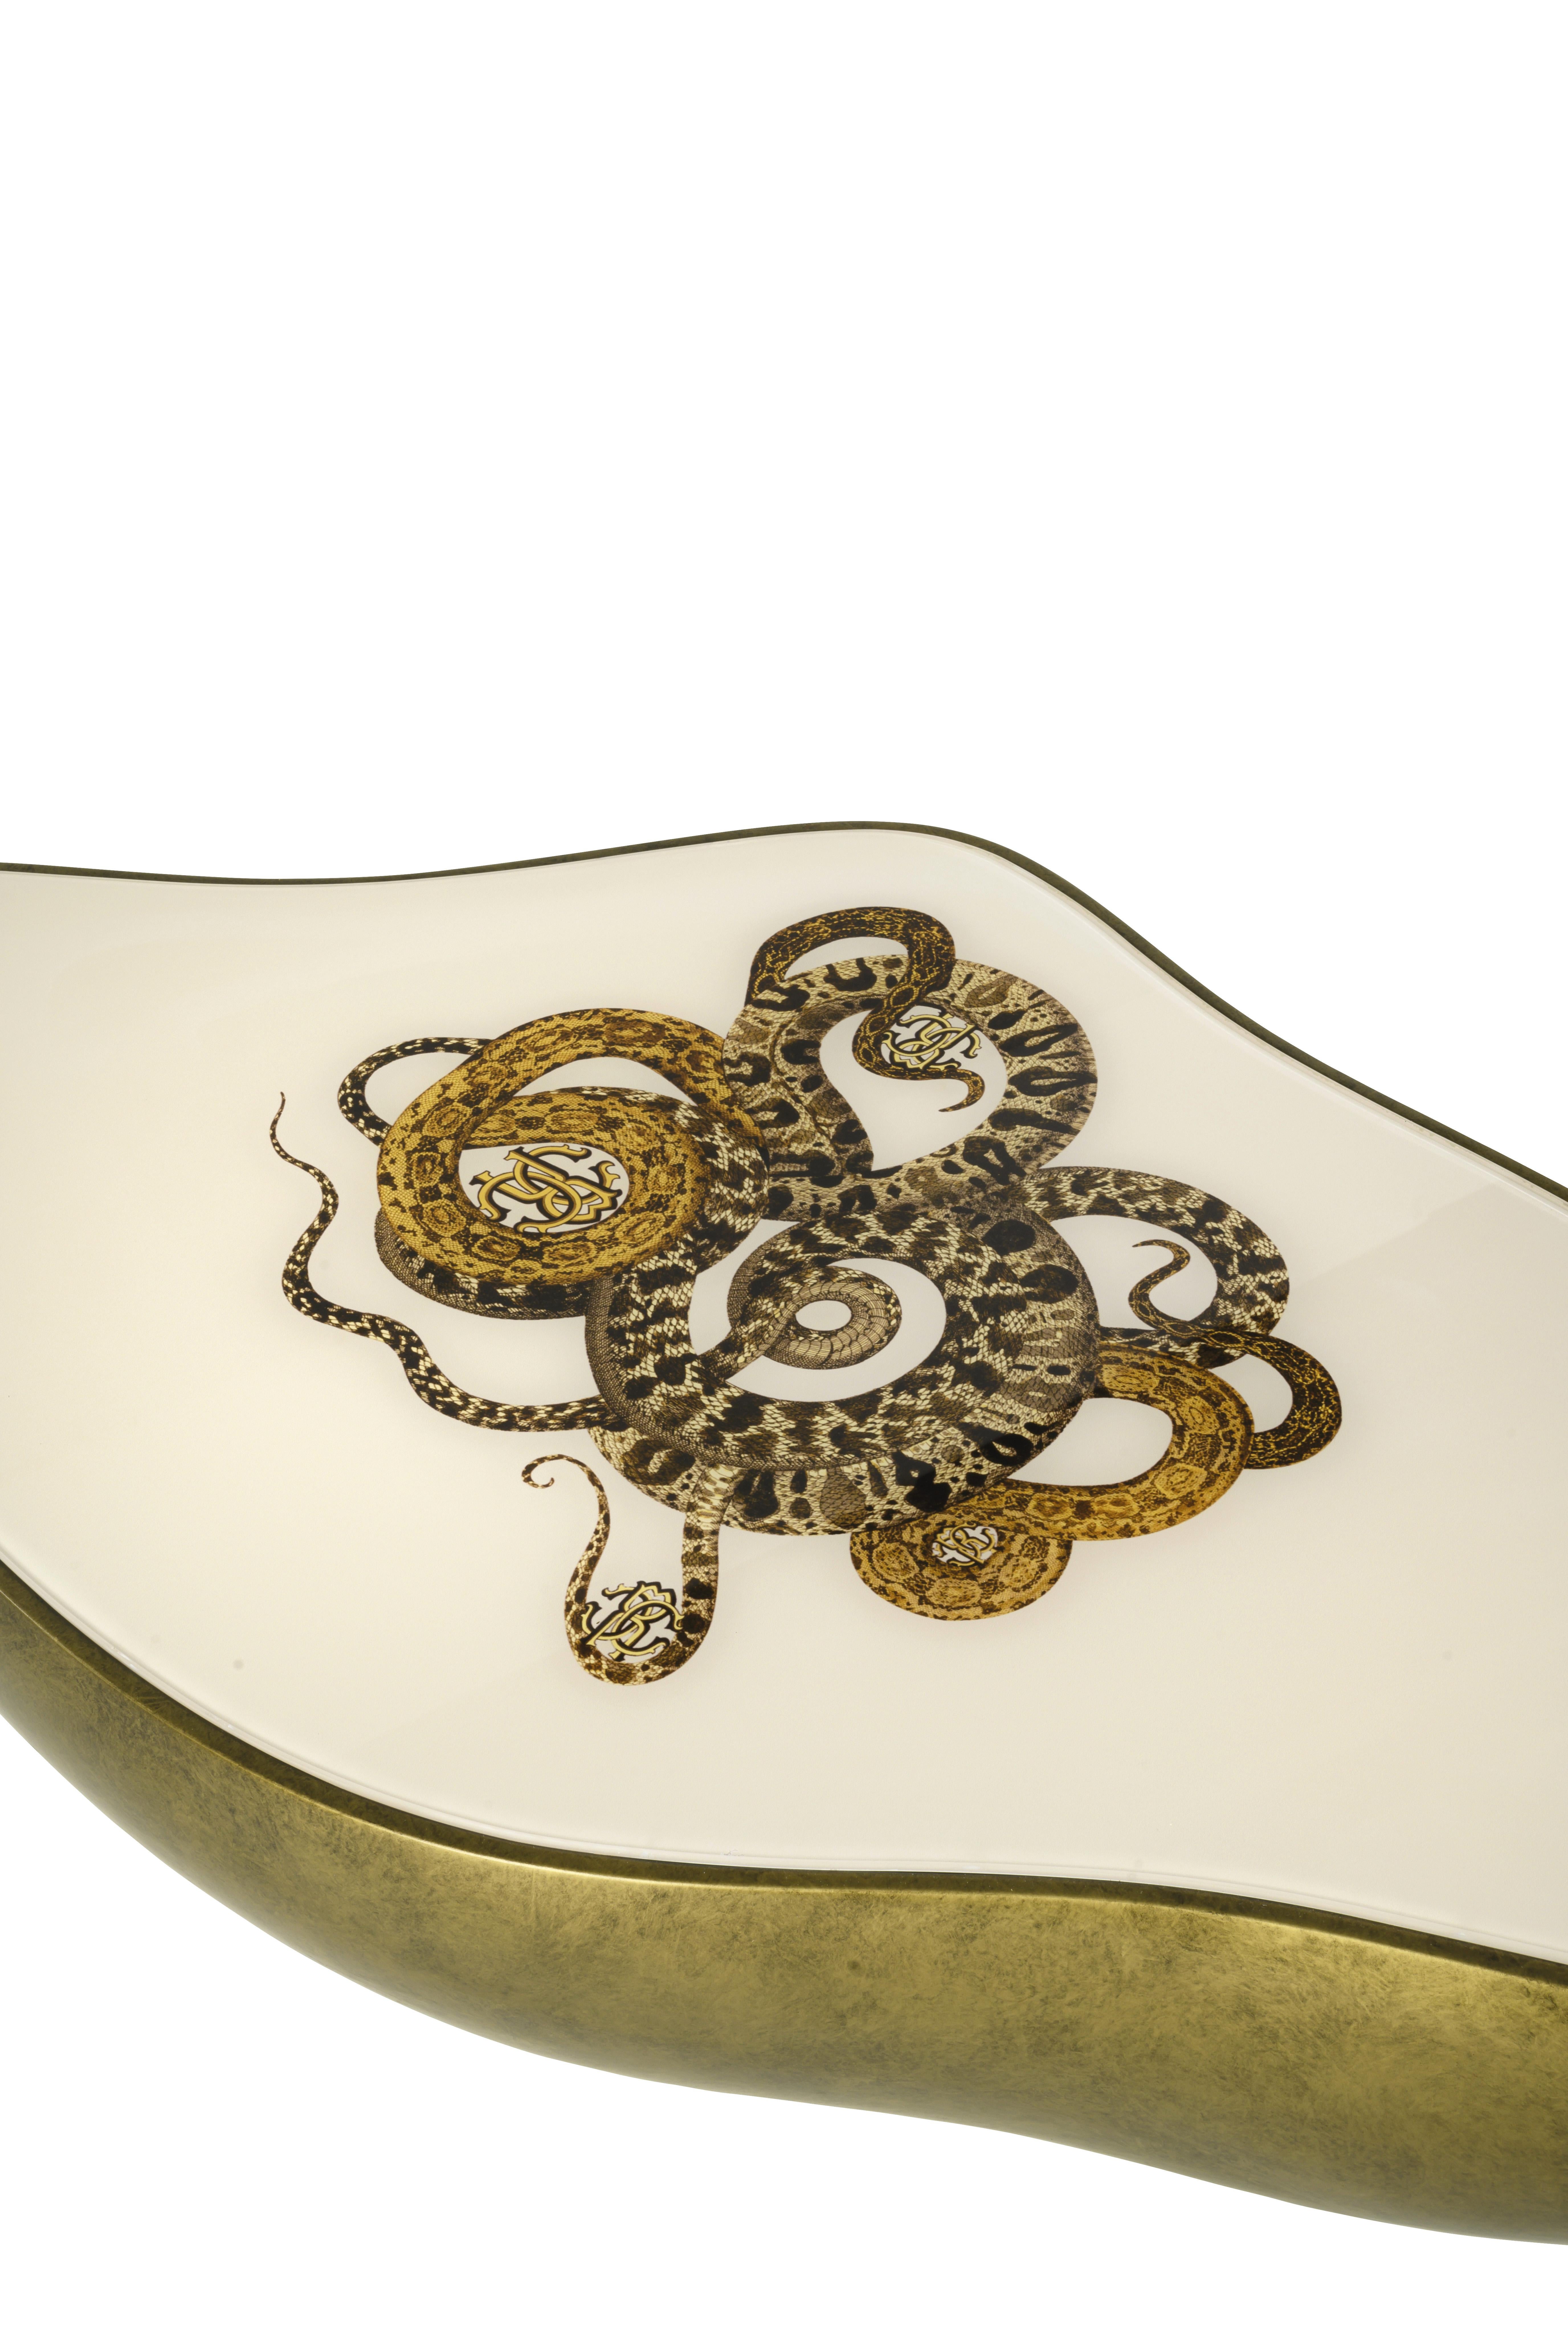 Modern 21st Century, Meru Central Table in Resin by Roberto Cavalli Home Interiors For Sale